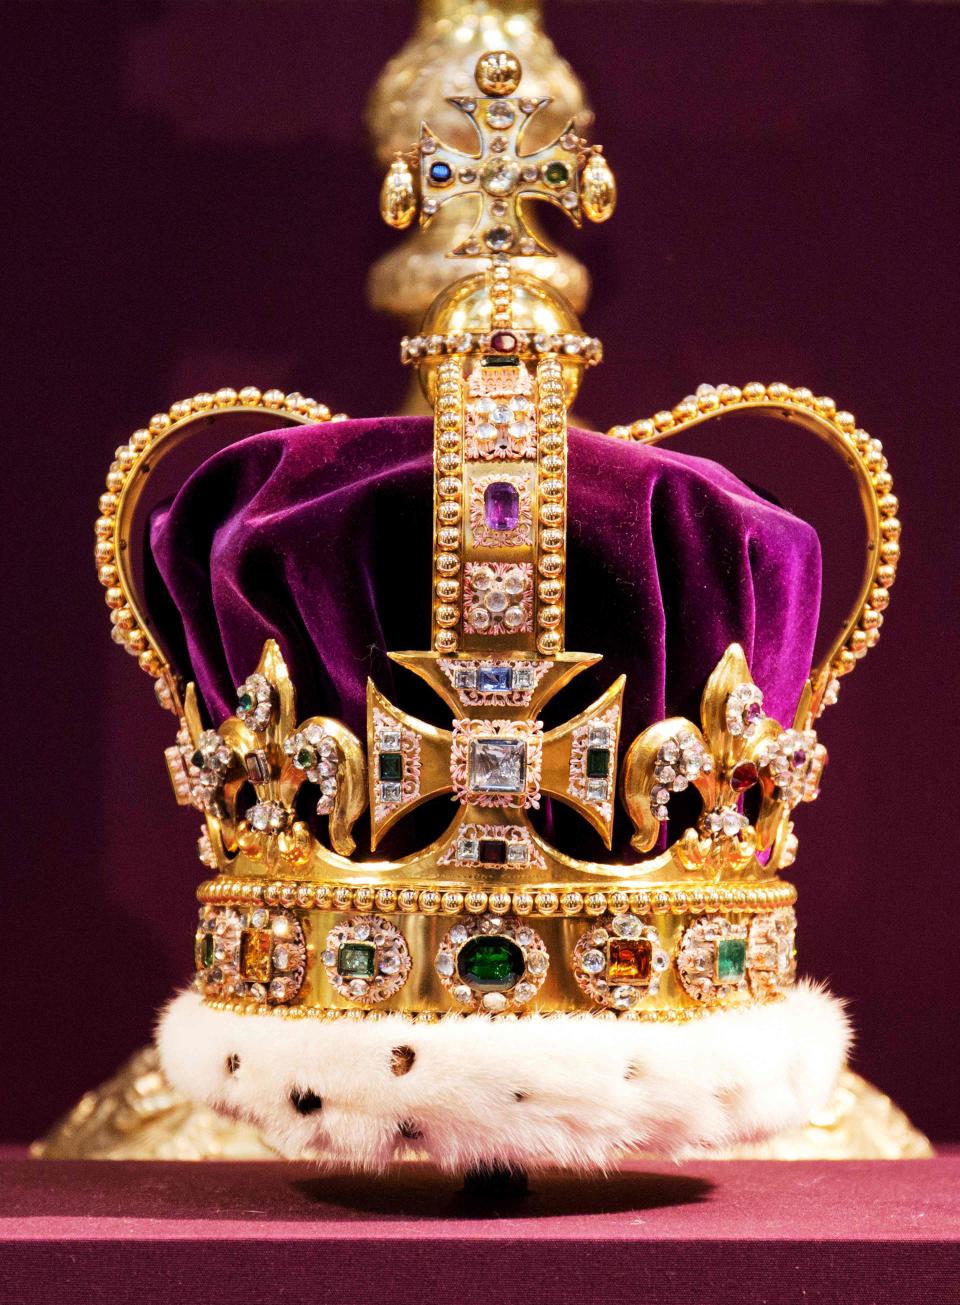 St. Edward's Crown, used in coronations for English and later British monarchs, and one of the senior Crown Jewels of Britain, on June 4, 2013, during a service to celebrate the 60th anniversary of the coronation of Queen Elizabeth II.